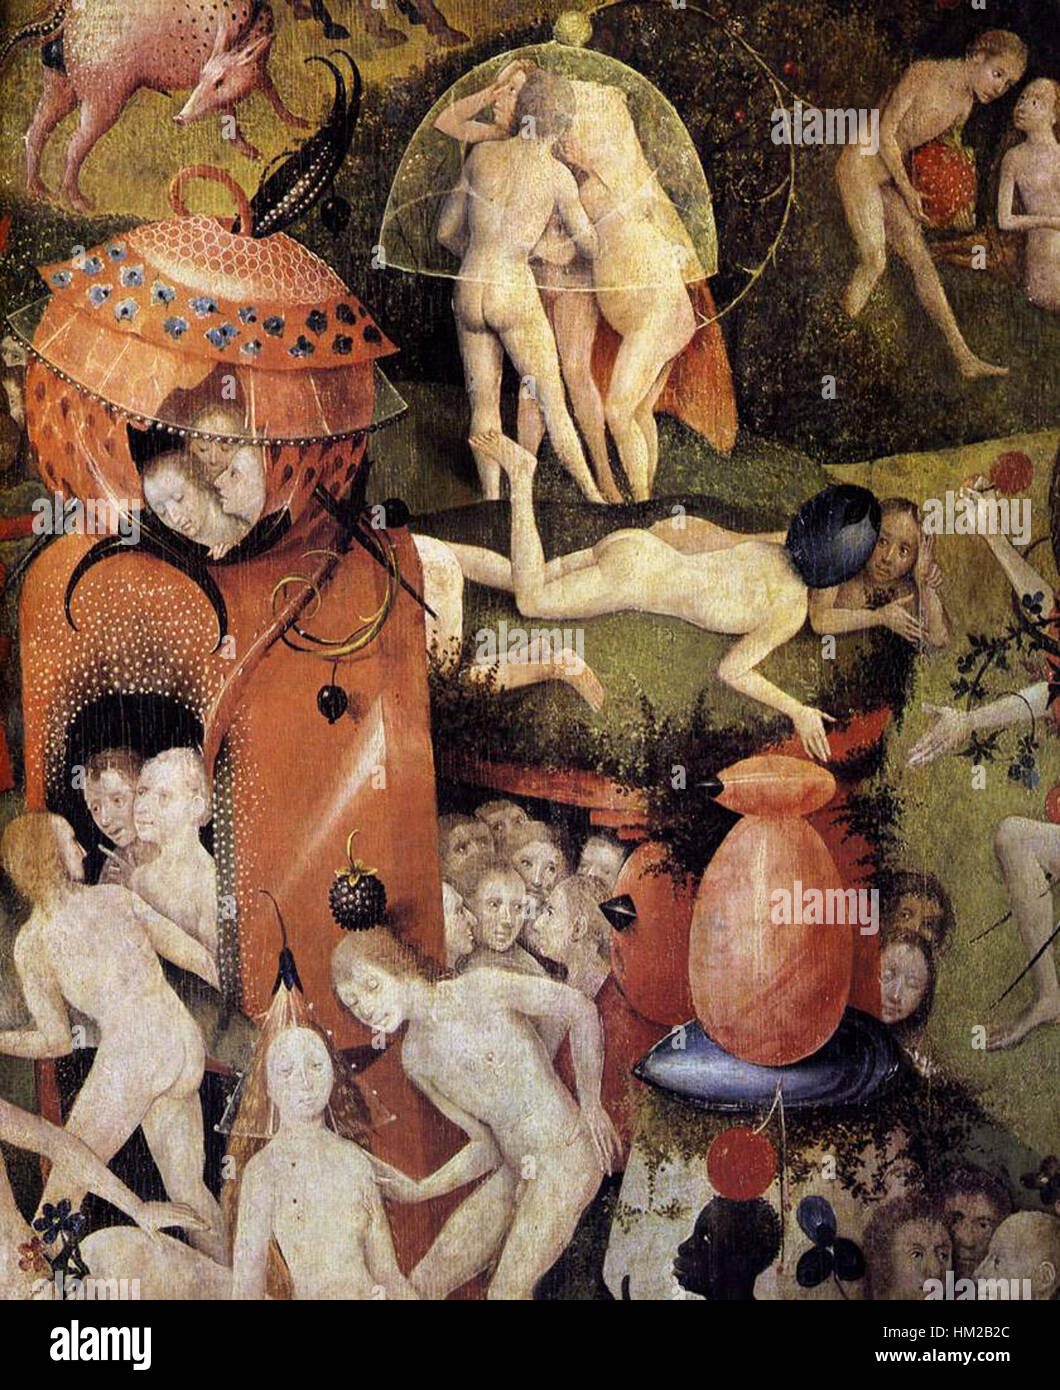 Hieronymus Bosch - Triptych of Garden of Earthly Delights (detail) - WGA2512 Stock Photo